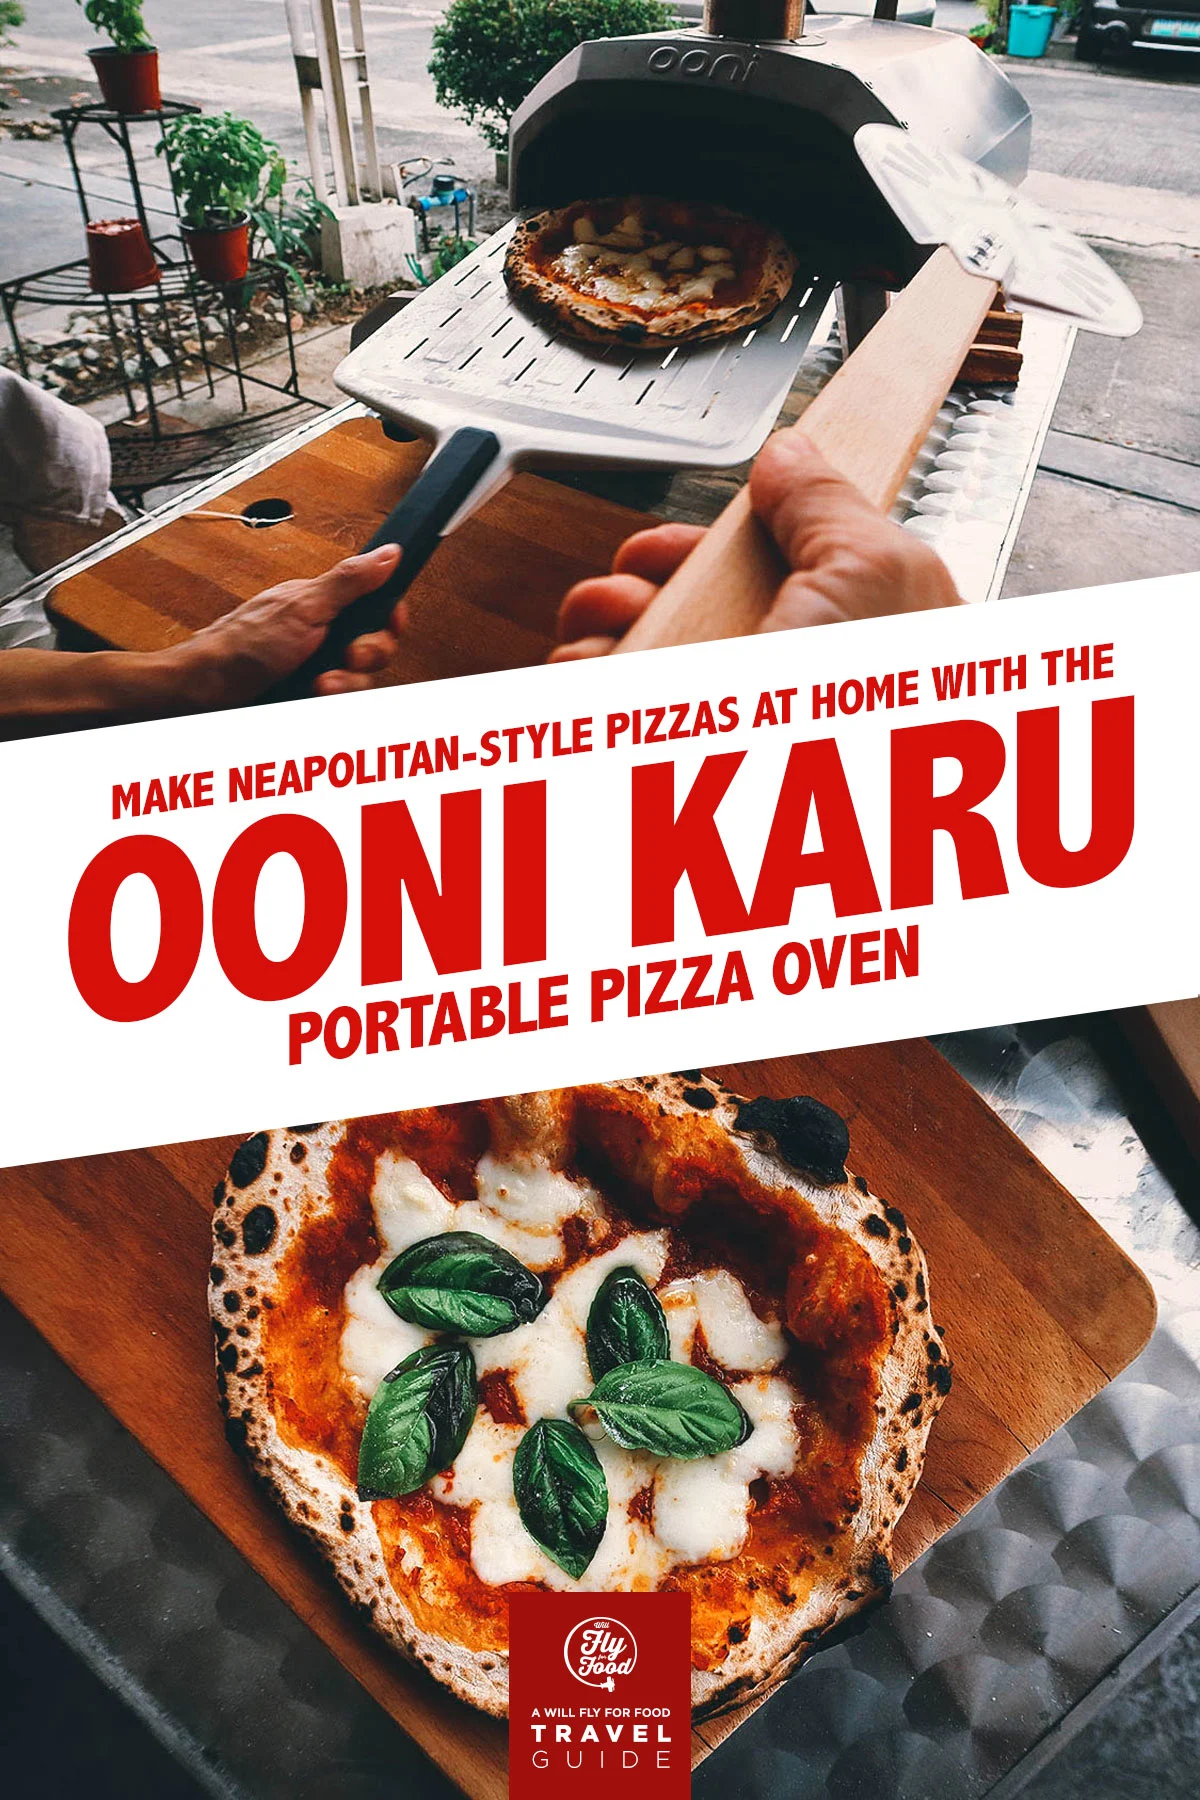 Making Neapolitan-style pizza with an Ooni pizza oven